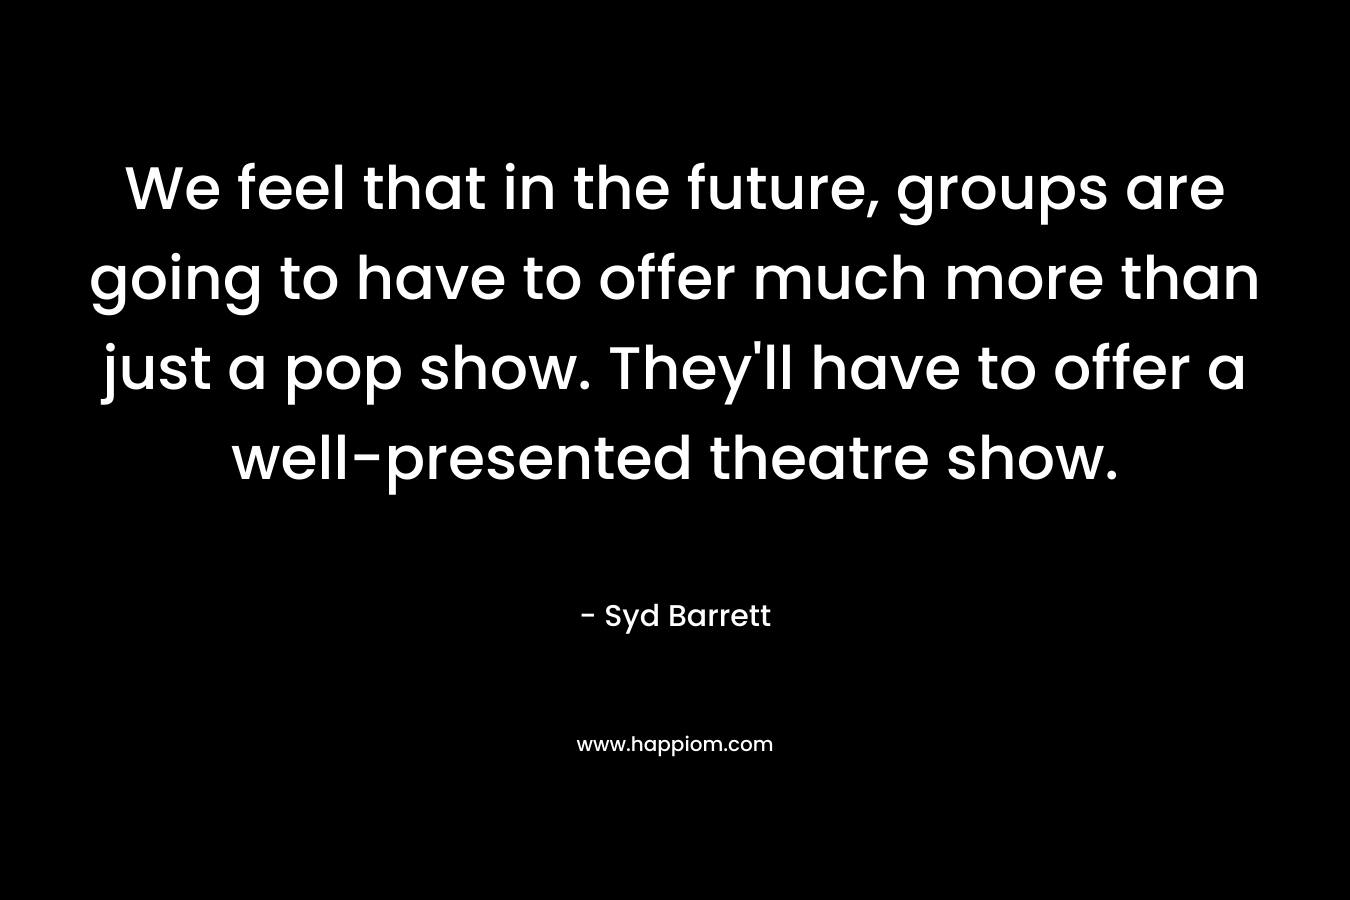 We feel that in the future, groups are going to have to offer much more than just a pop show. They’ll have to offer a well-presented theatre show. – Syd Barrett